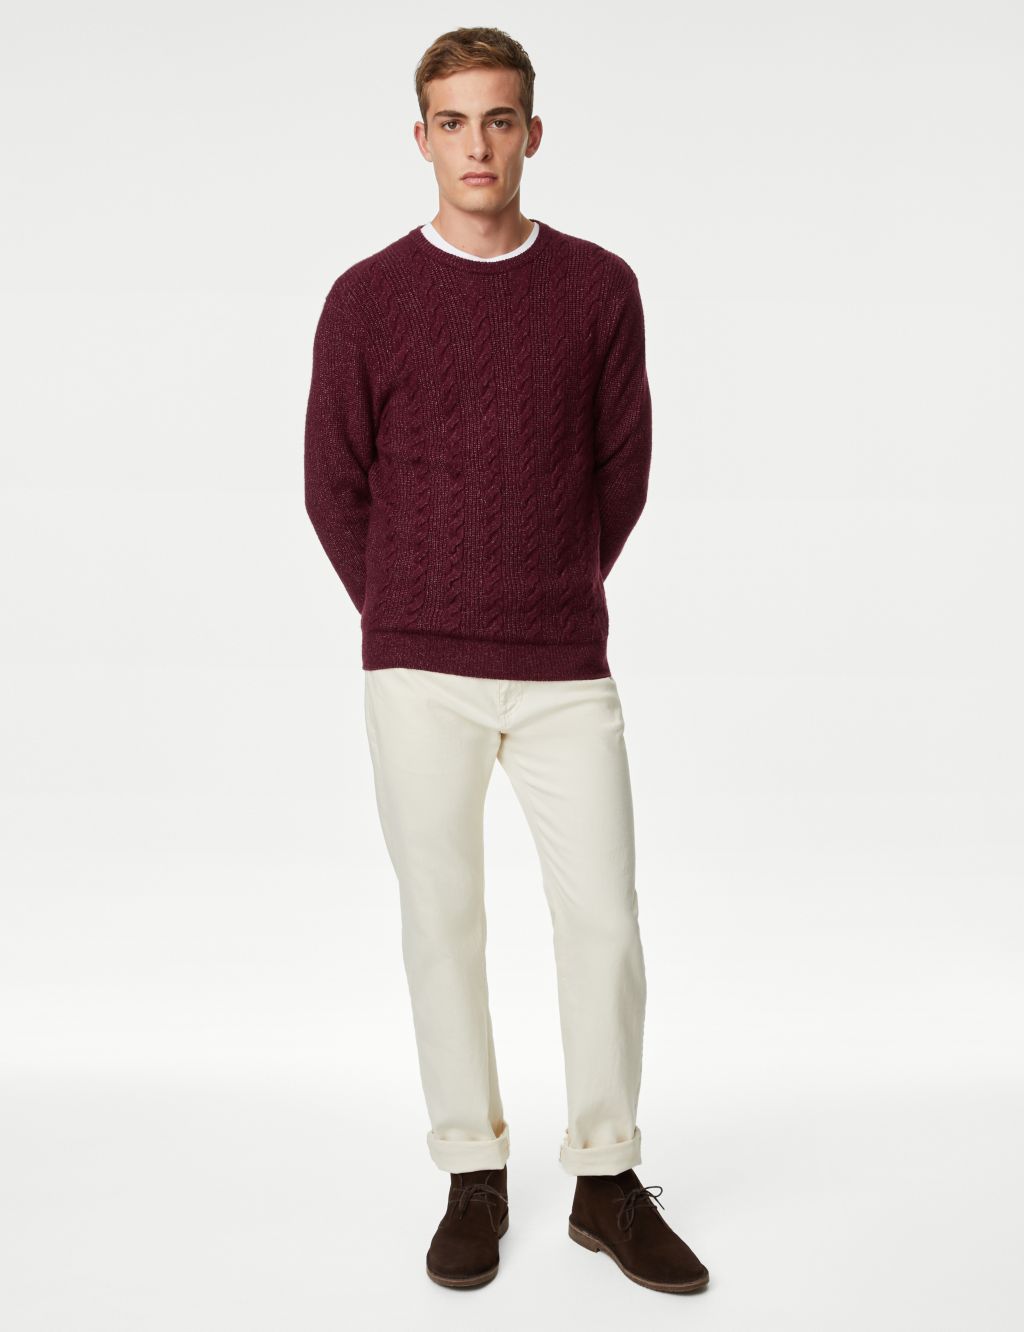 Supersoft Chunky Cable Crew Neck Jumper image 1